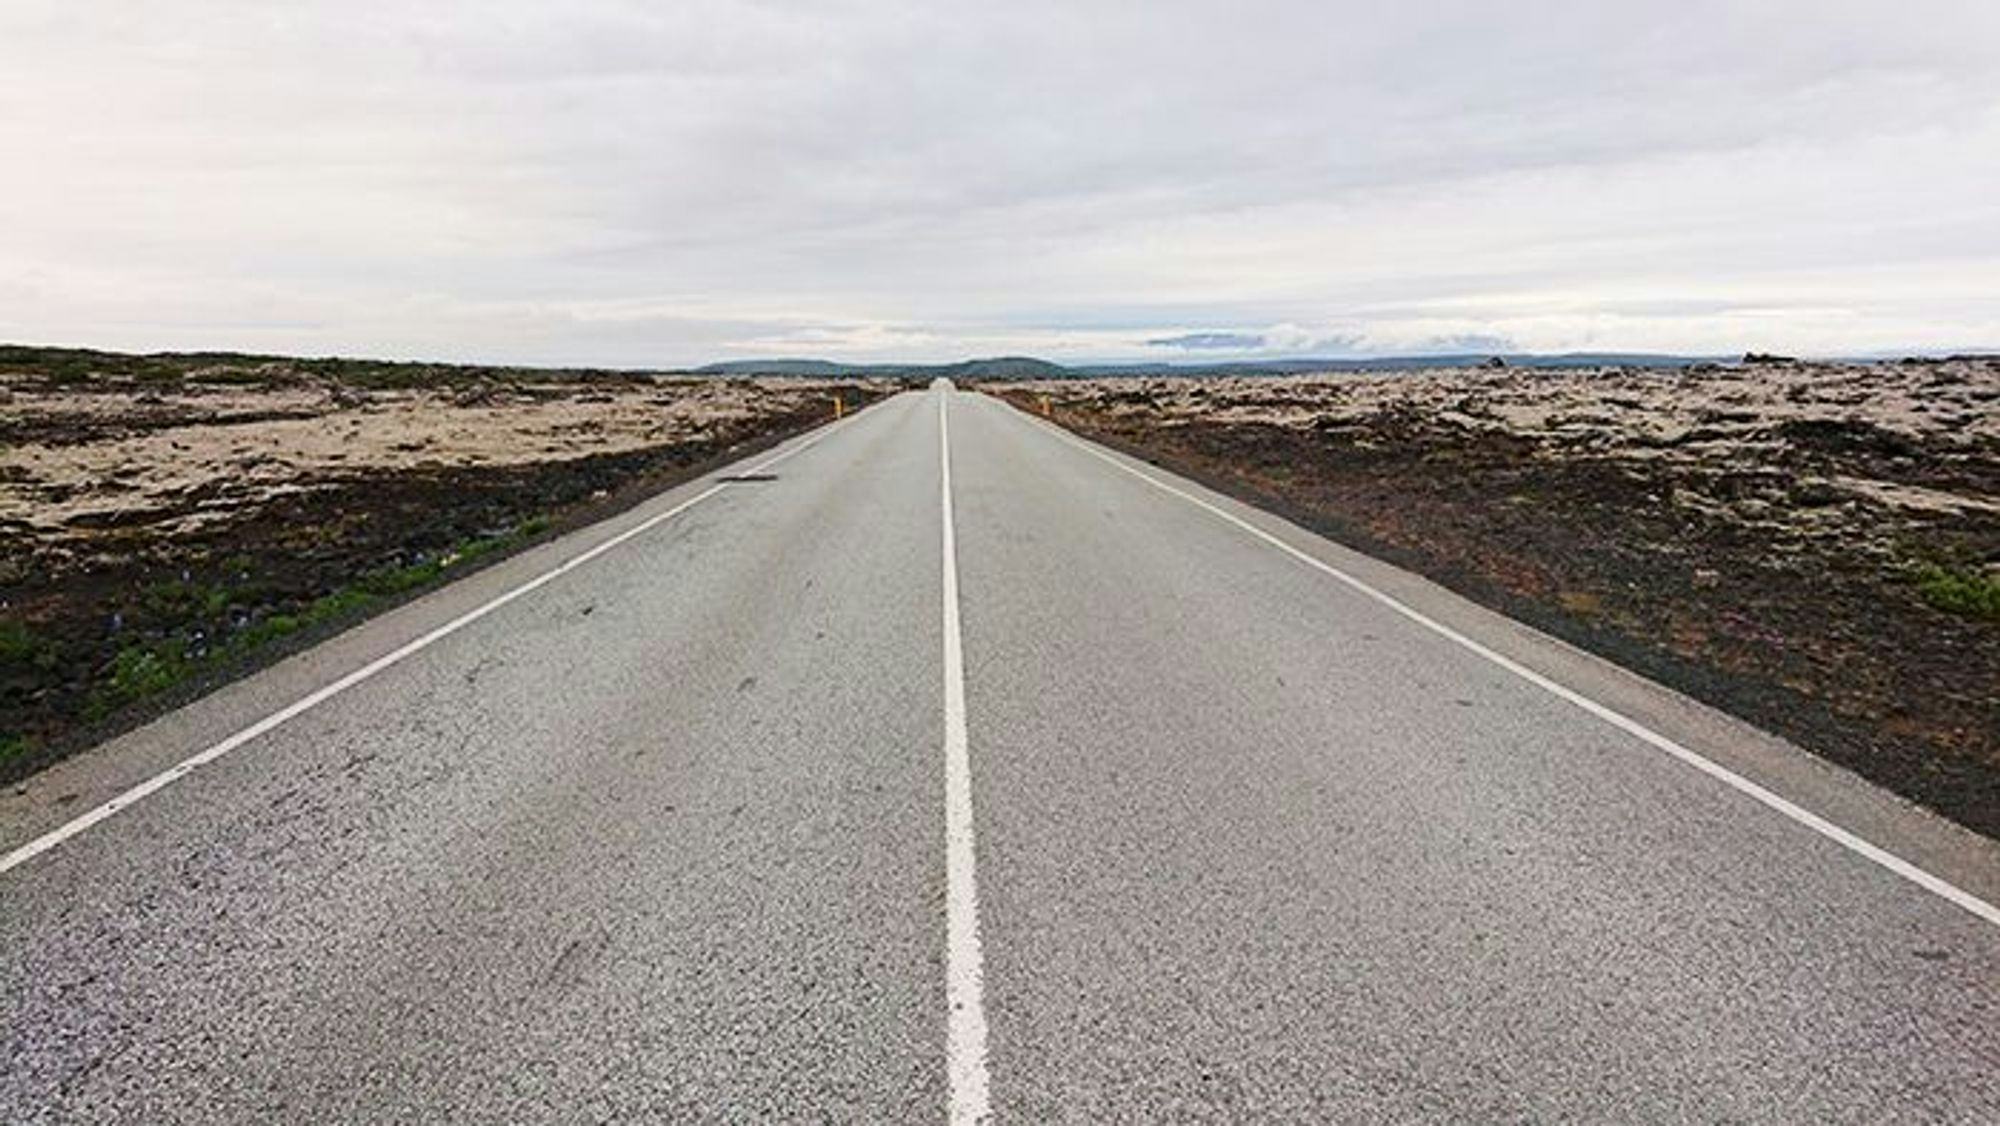 A straight empty road stretched into the distance through a barren landscape